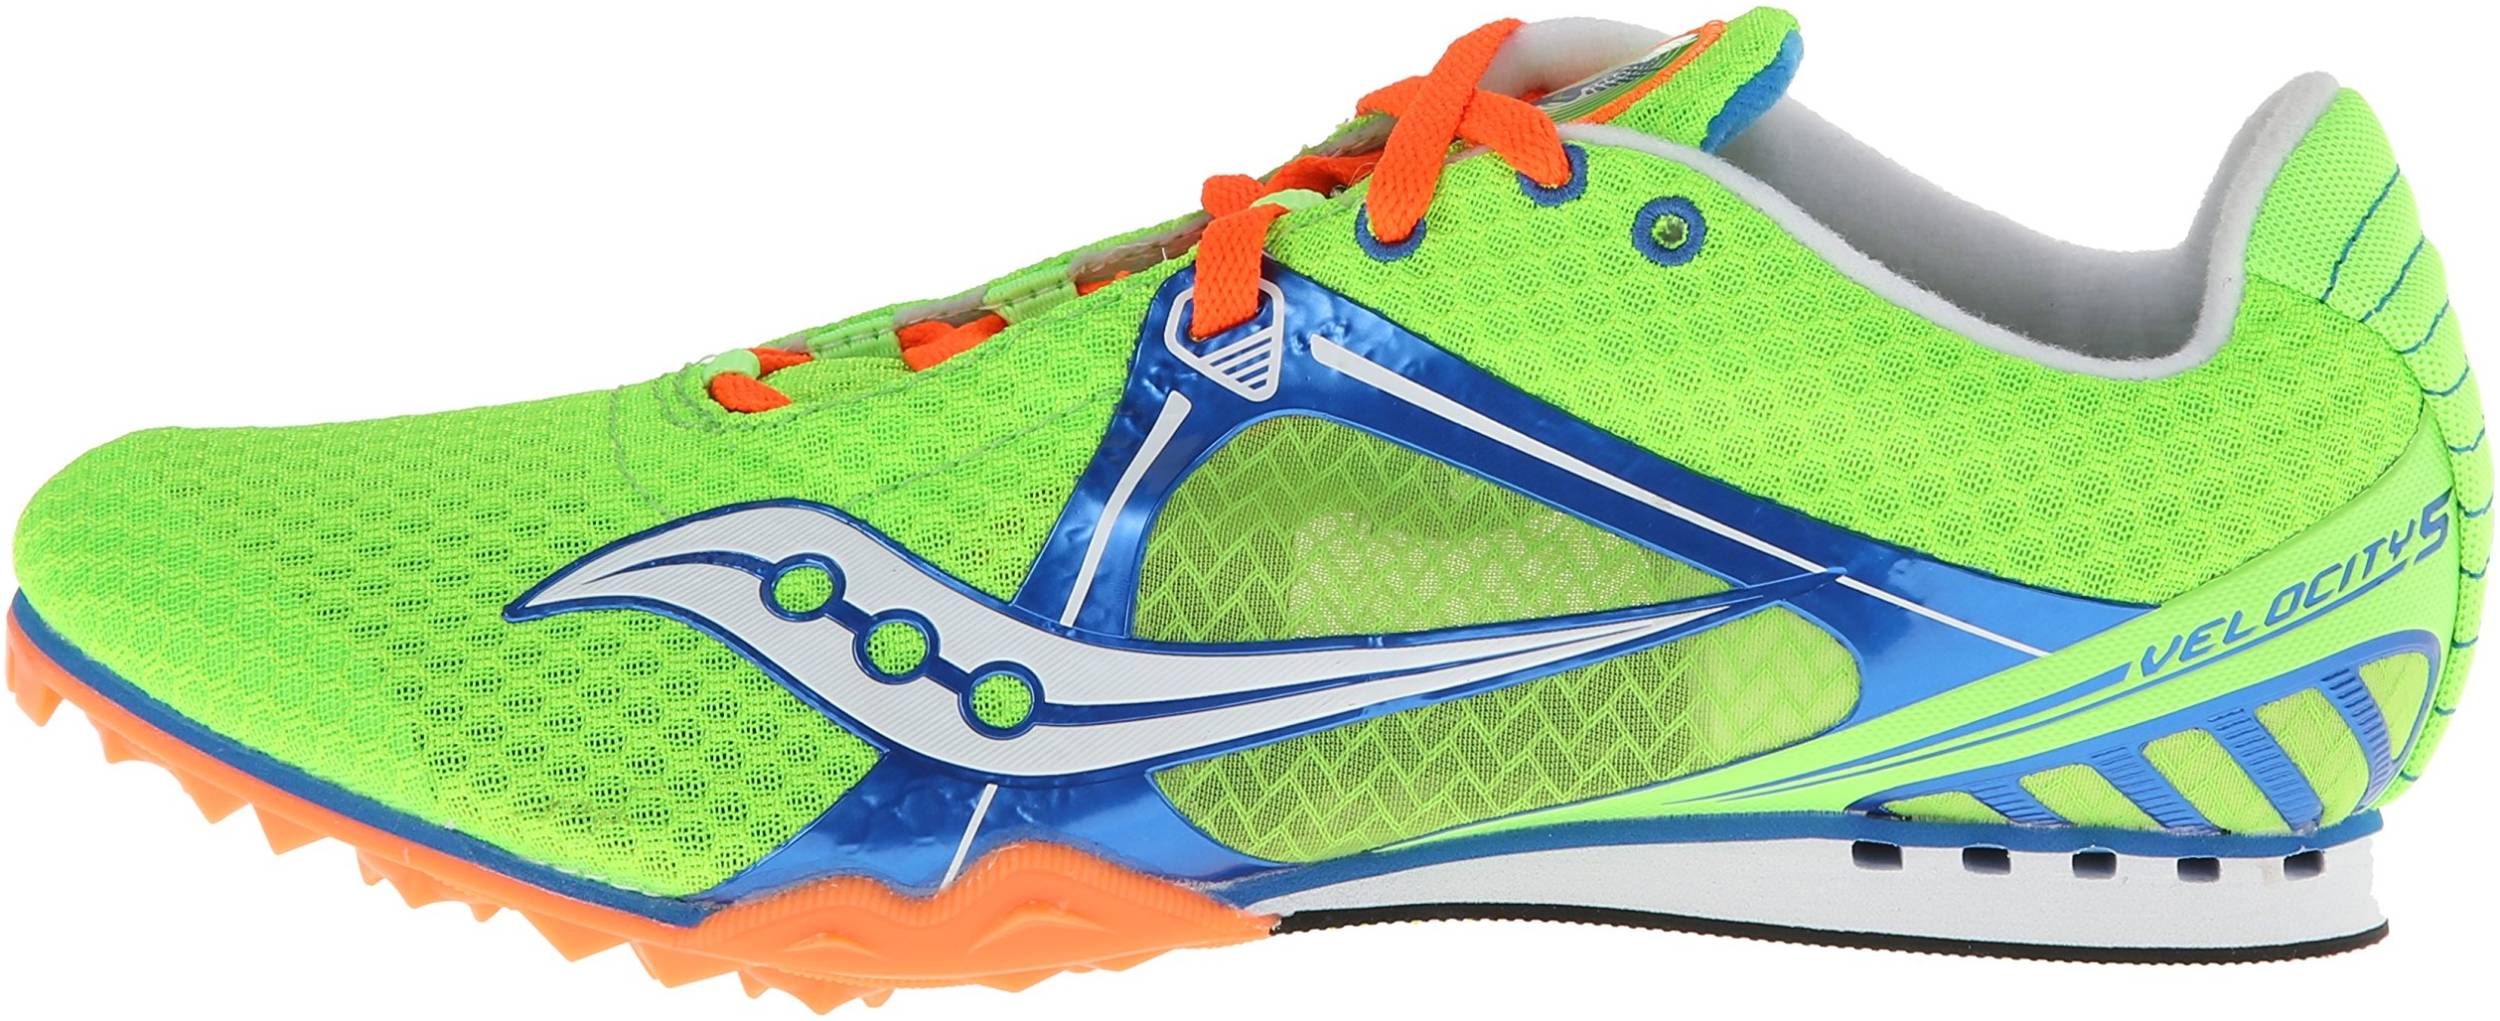 Only $20 + Review of Saucony Velocity 5 